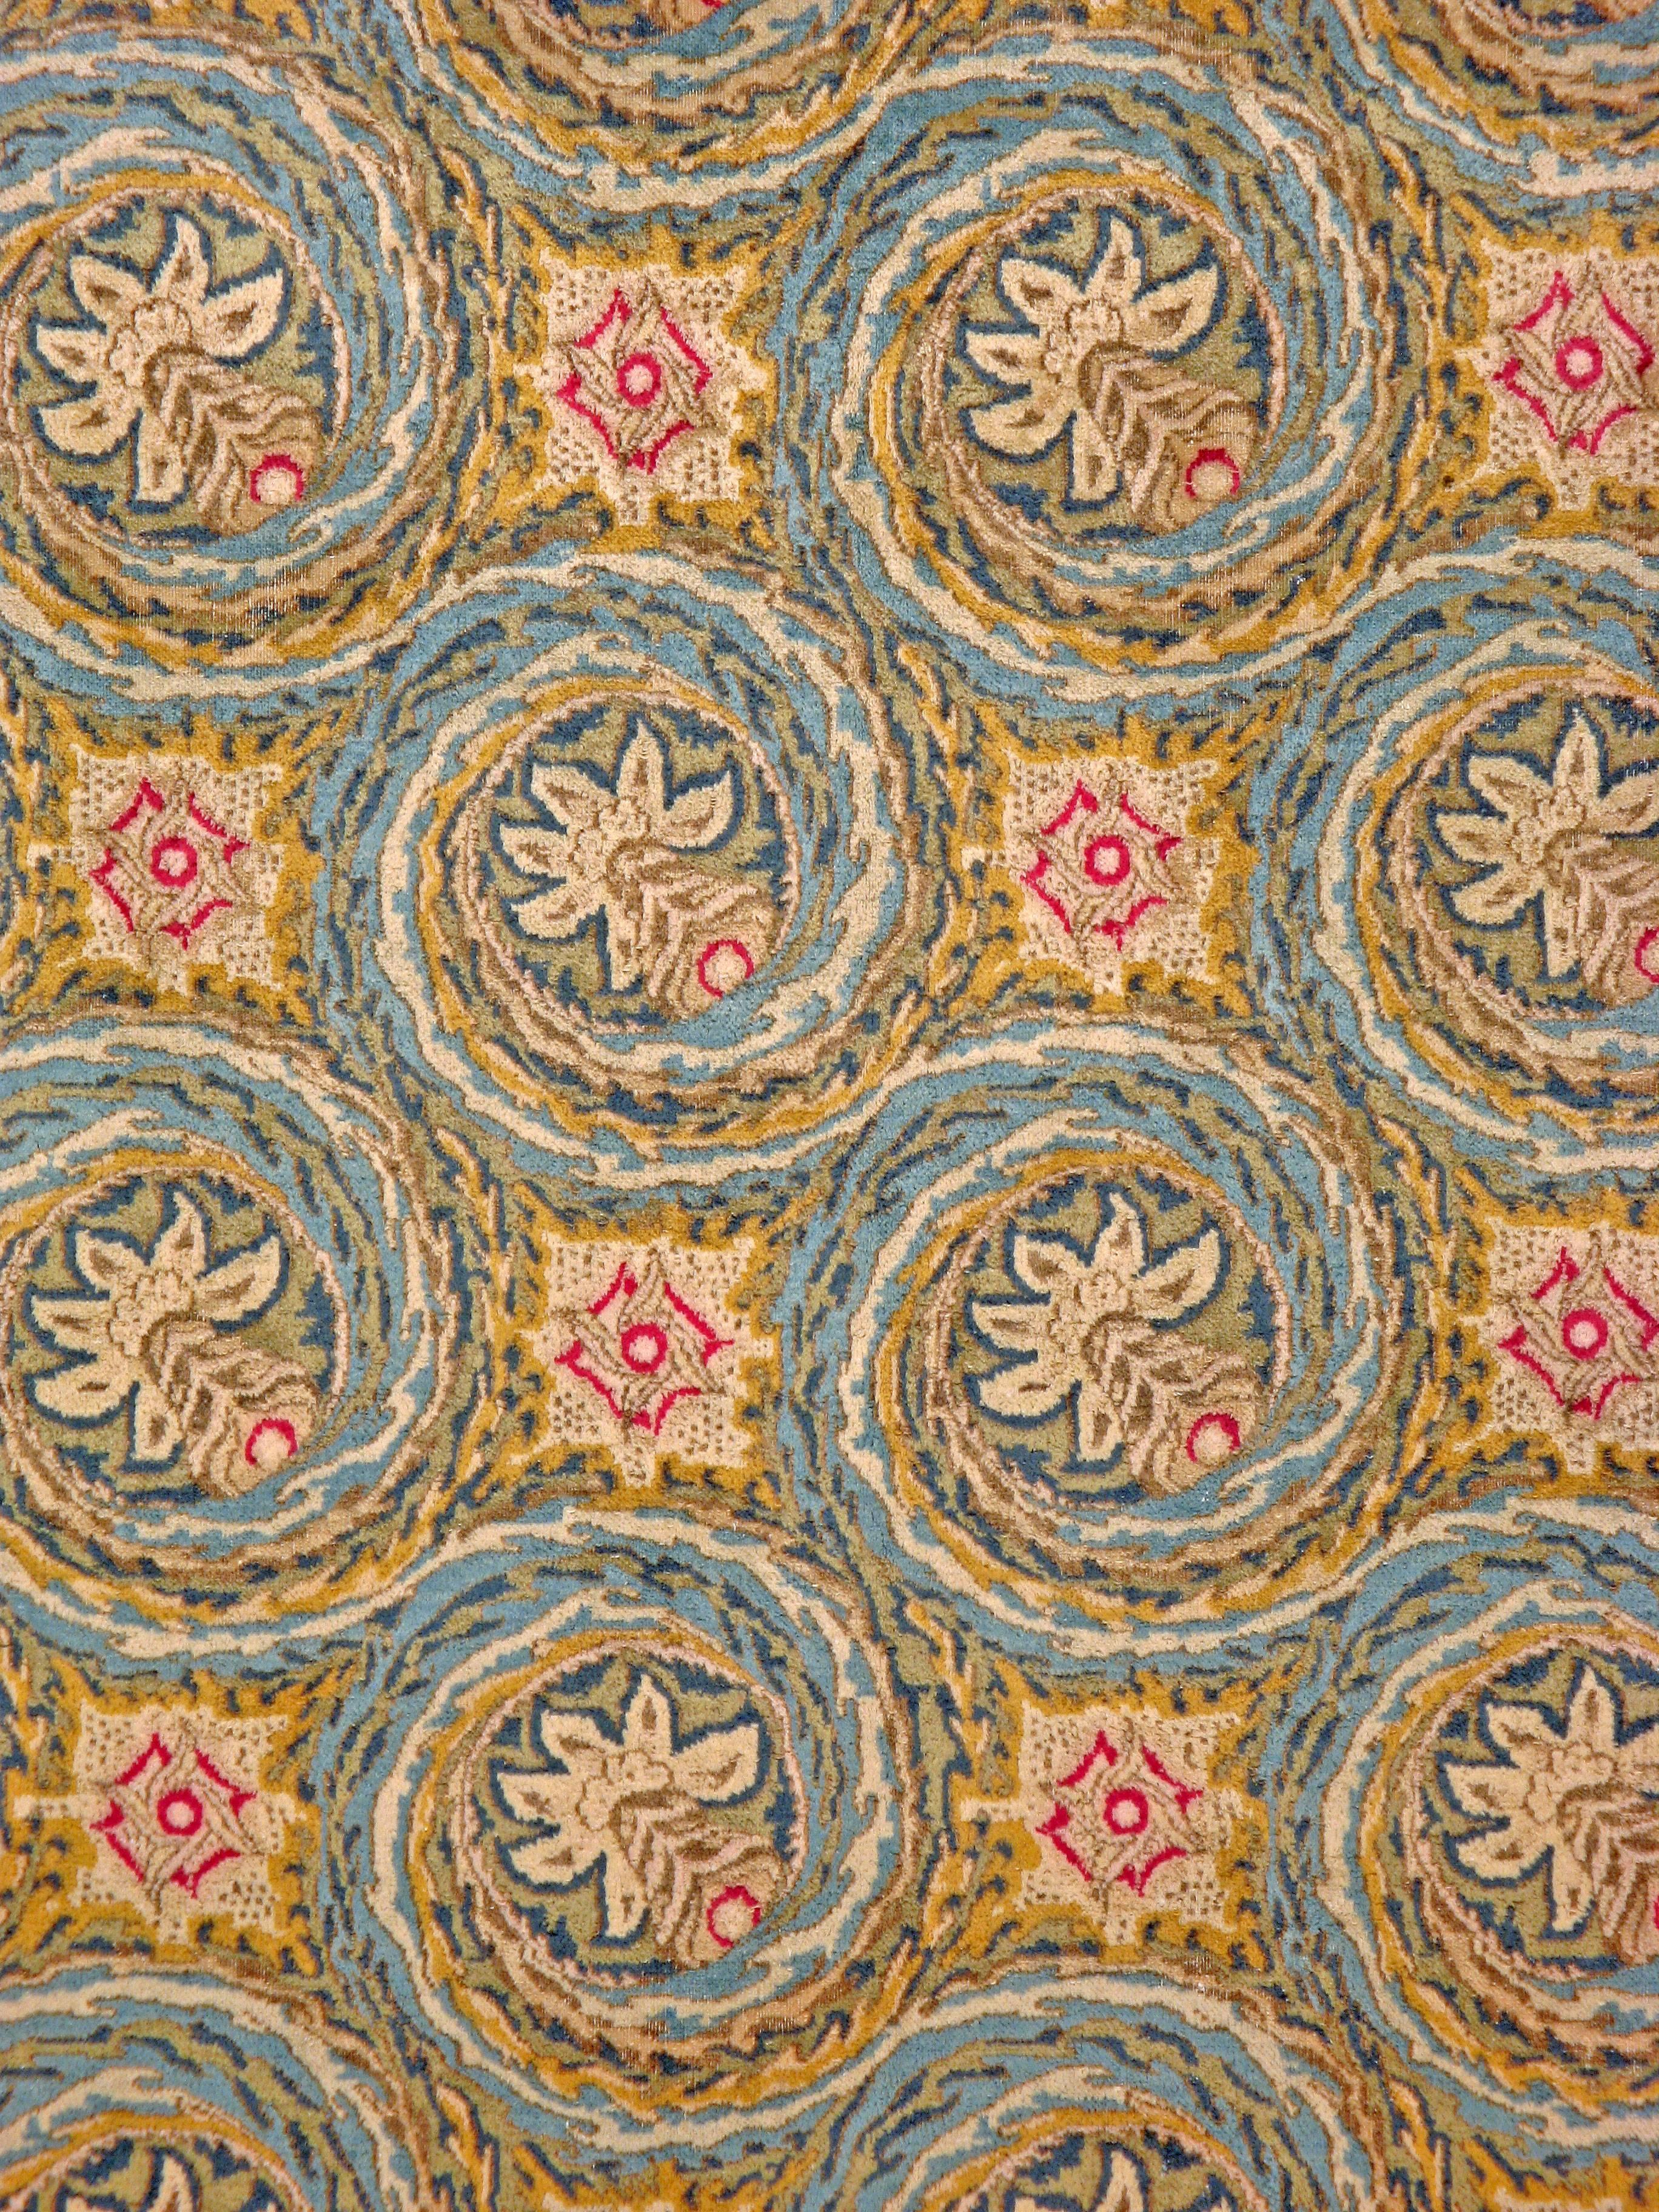 A vintage Persian Kerman carpet from the mid-20th century featuring a 'gol farang (foreign flower)' motif encompassed in a spiral brushstroke motif.